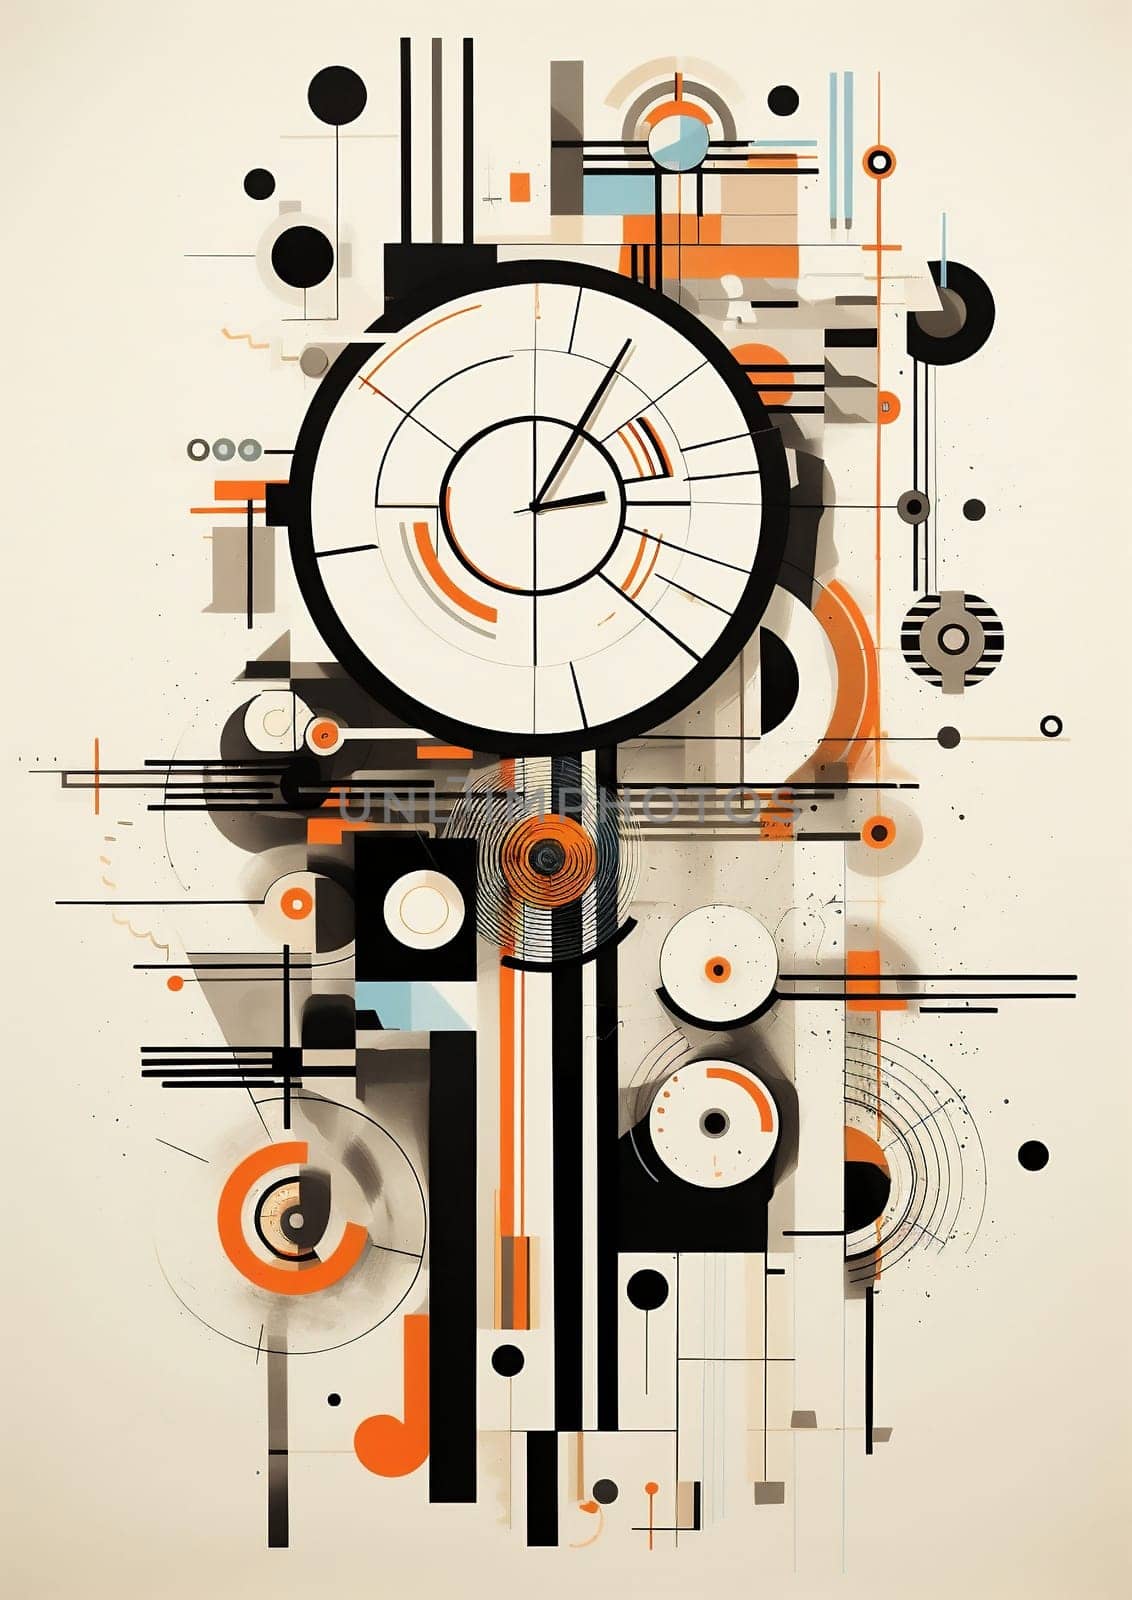 Background mechanical gear design circle modern pattern concept abstract technology vintage clock metal backdrop texture machine watch time hour illustration retro art